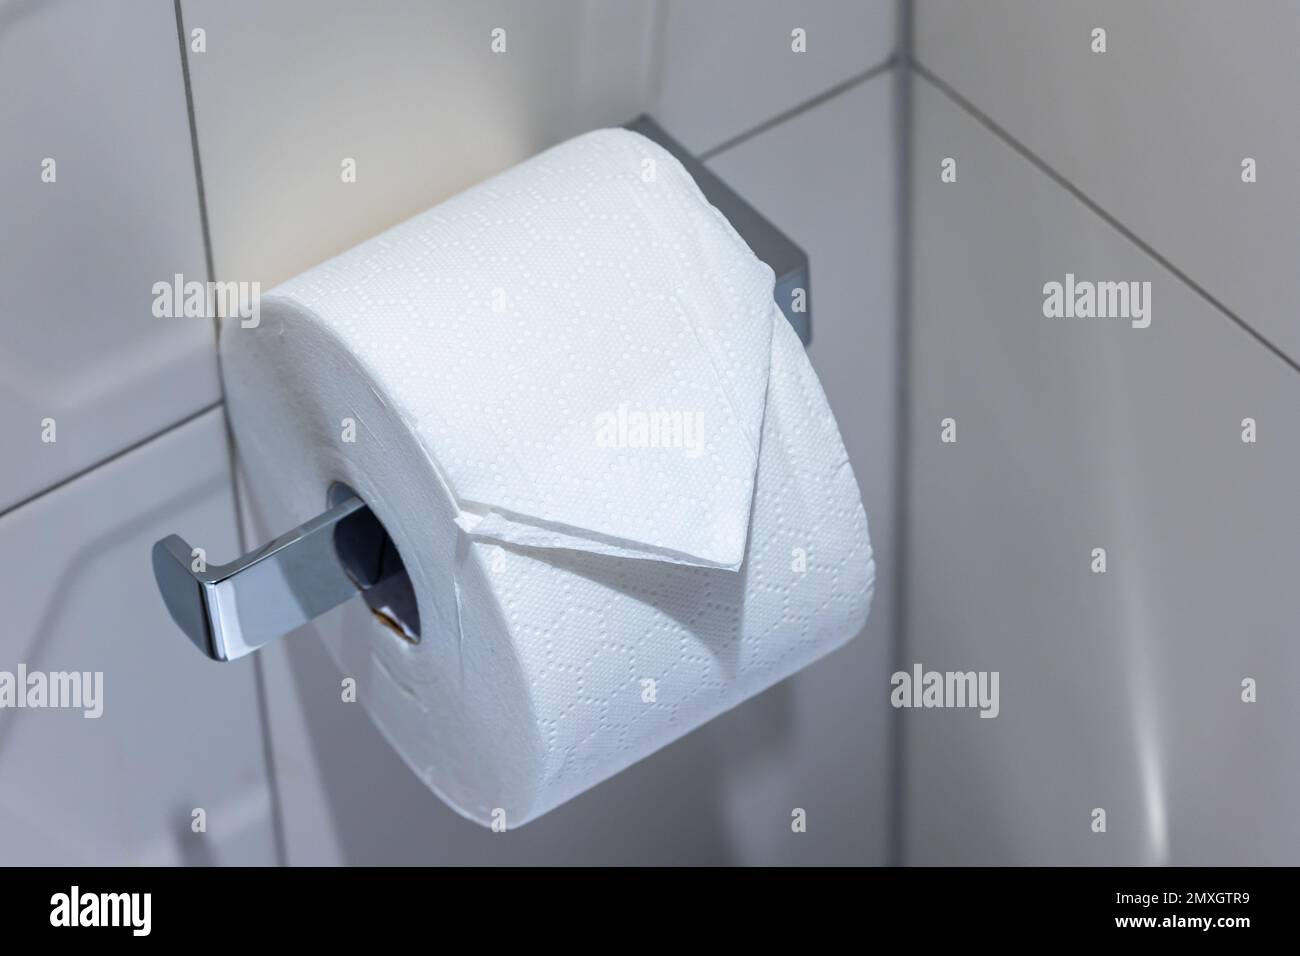 New roll of toilet paper on the holder in the toilet. Toilet finished with white tiles Stock Photo